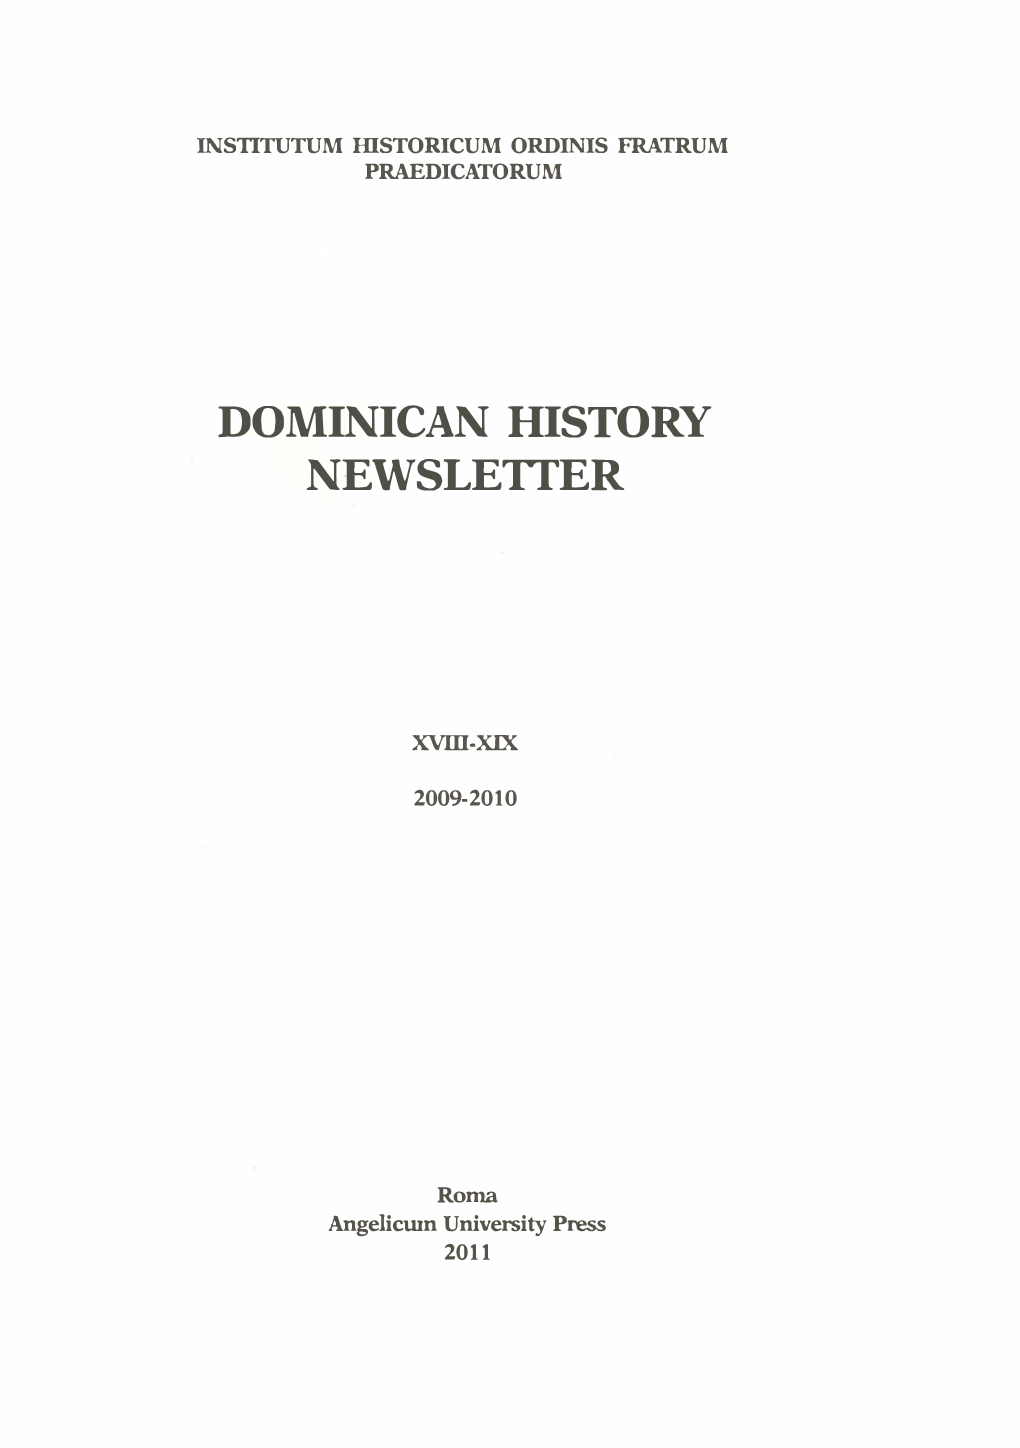 Dominican History Newsle1ter